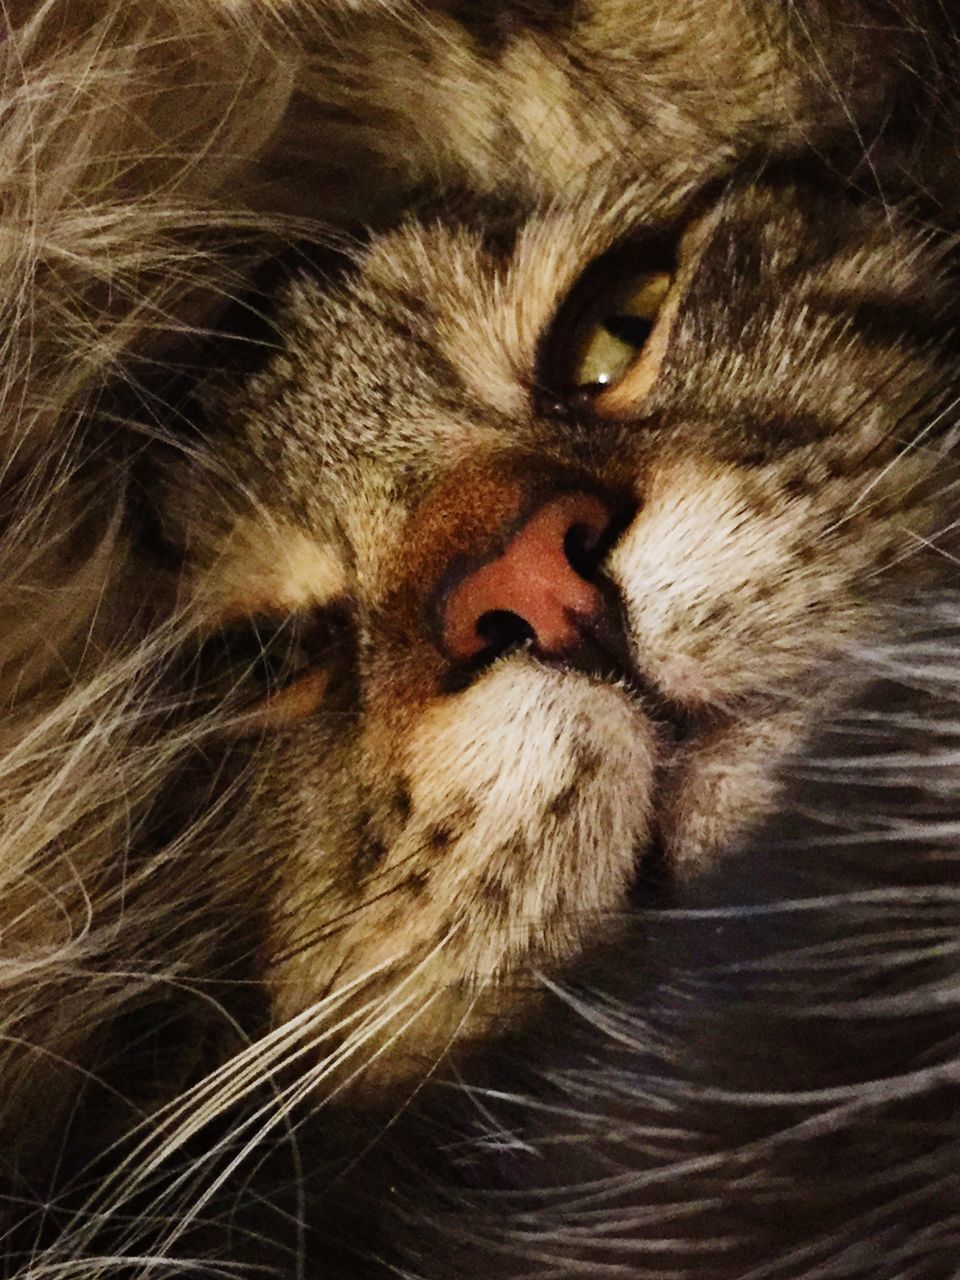 CLOSE-UP PORTRAIT OF TABBY